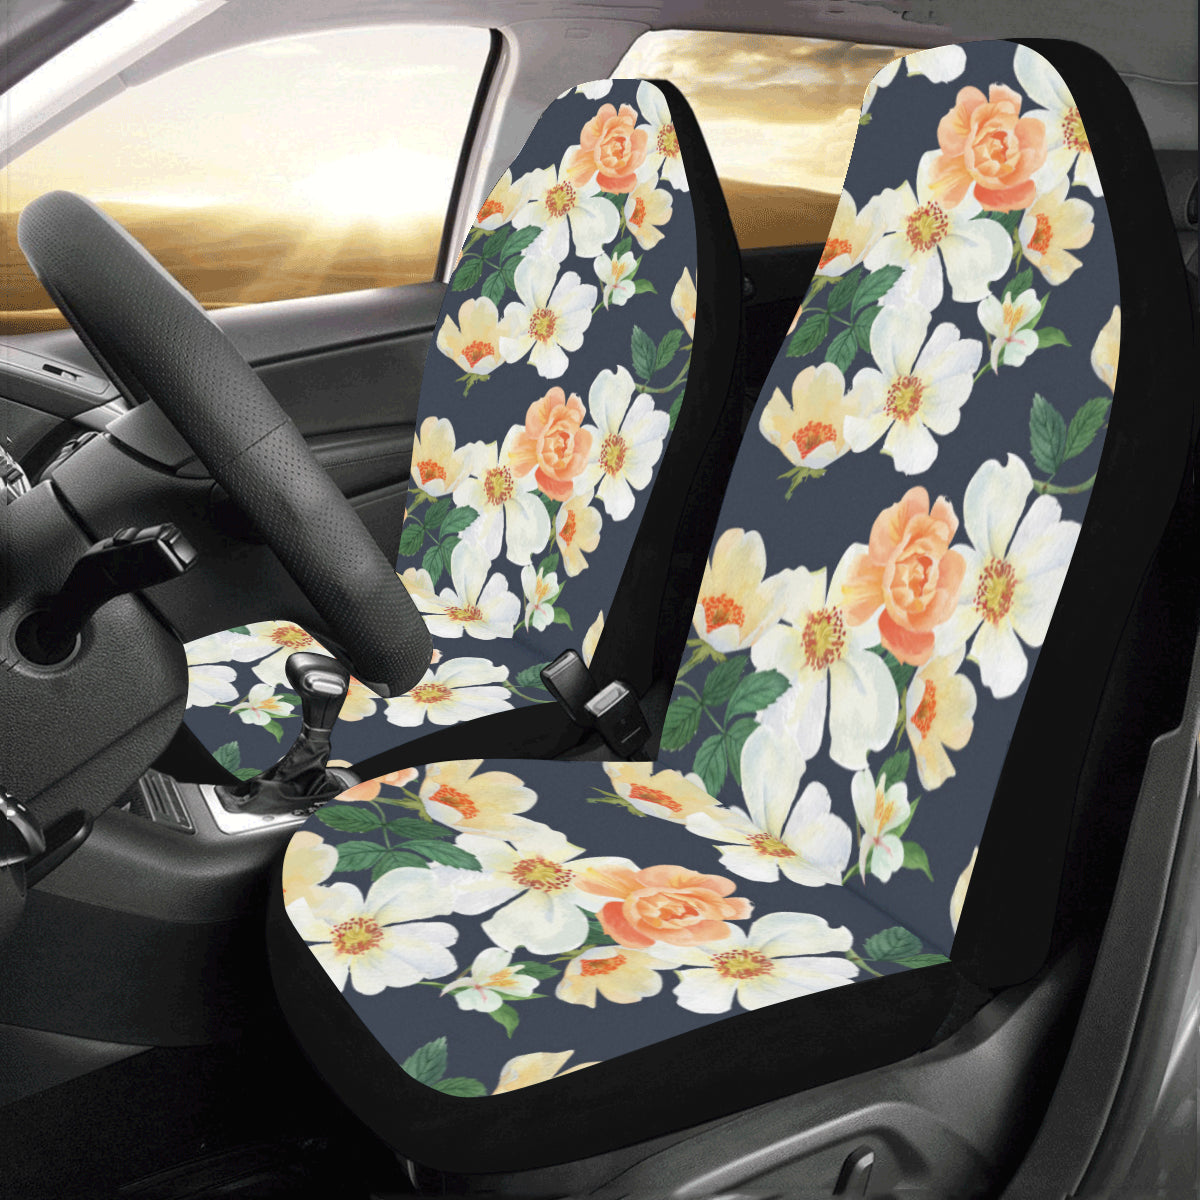 Cute Flowers Car Seat Covers 2 pc, Floral Pretty Tropical Front Seat Covers, Car SUV Vans Seat Protector Accessory Starcove Fashion